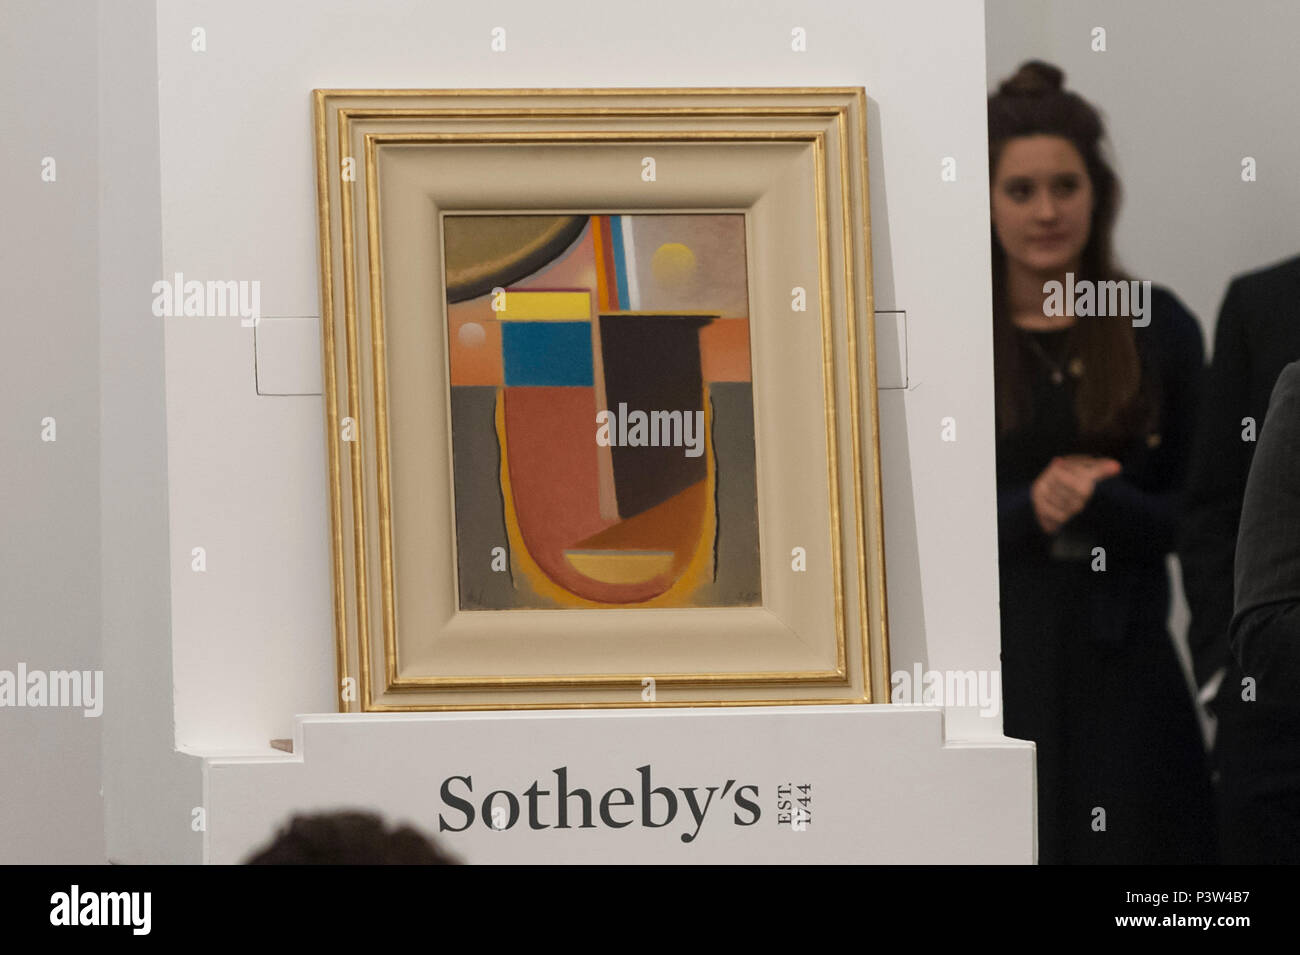 London, UK.  19 June 2018. ''Abstrakter Kopf: Klarheit (Abstract Head: Lucidity)'' by Alexej Von Jawlensky, (Est. £500,000 - 700,000) sold for a hammer price of £420,000 at Sotheby's Impressionist & Modern art evening sale in New Bond Street.  Credit: Stephen Chung / Alamy Live News Stock Photo